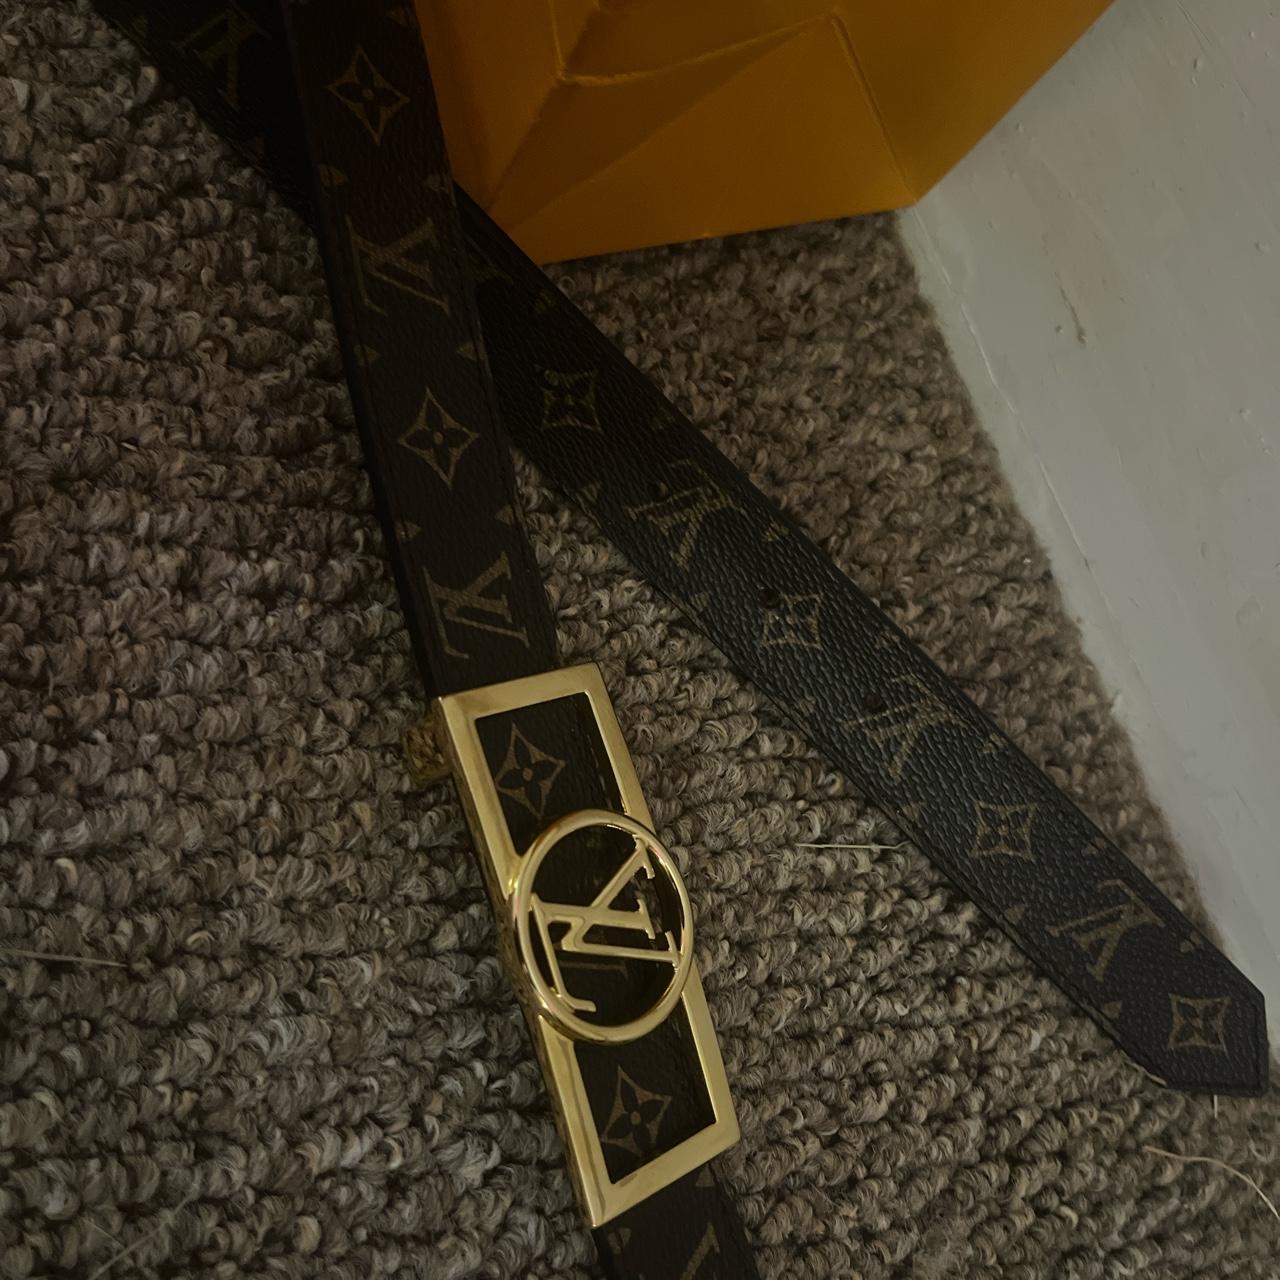 Brown and gold Lv belt, worn once has a extra hole